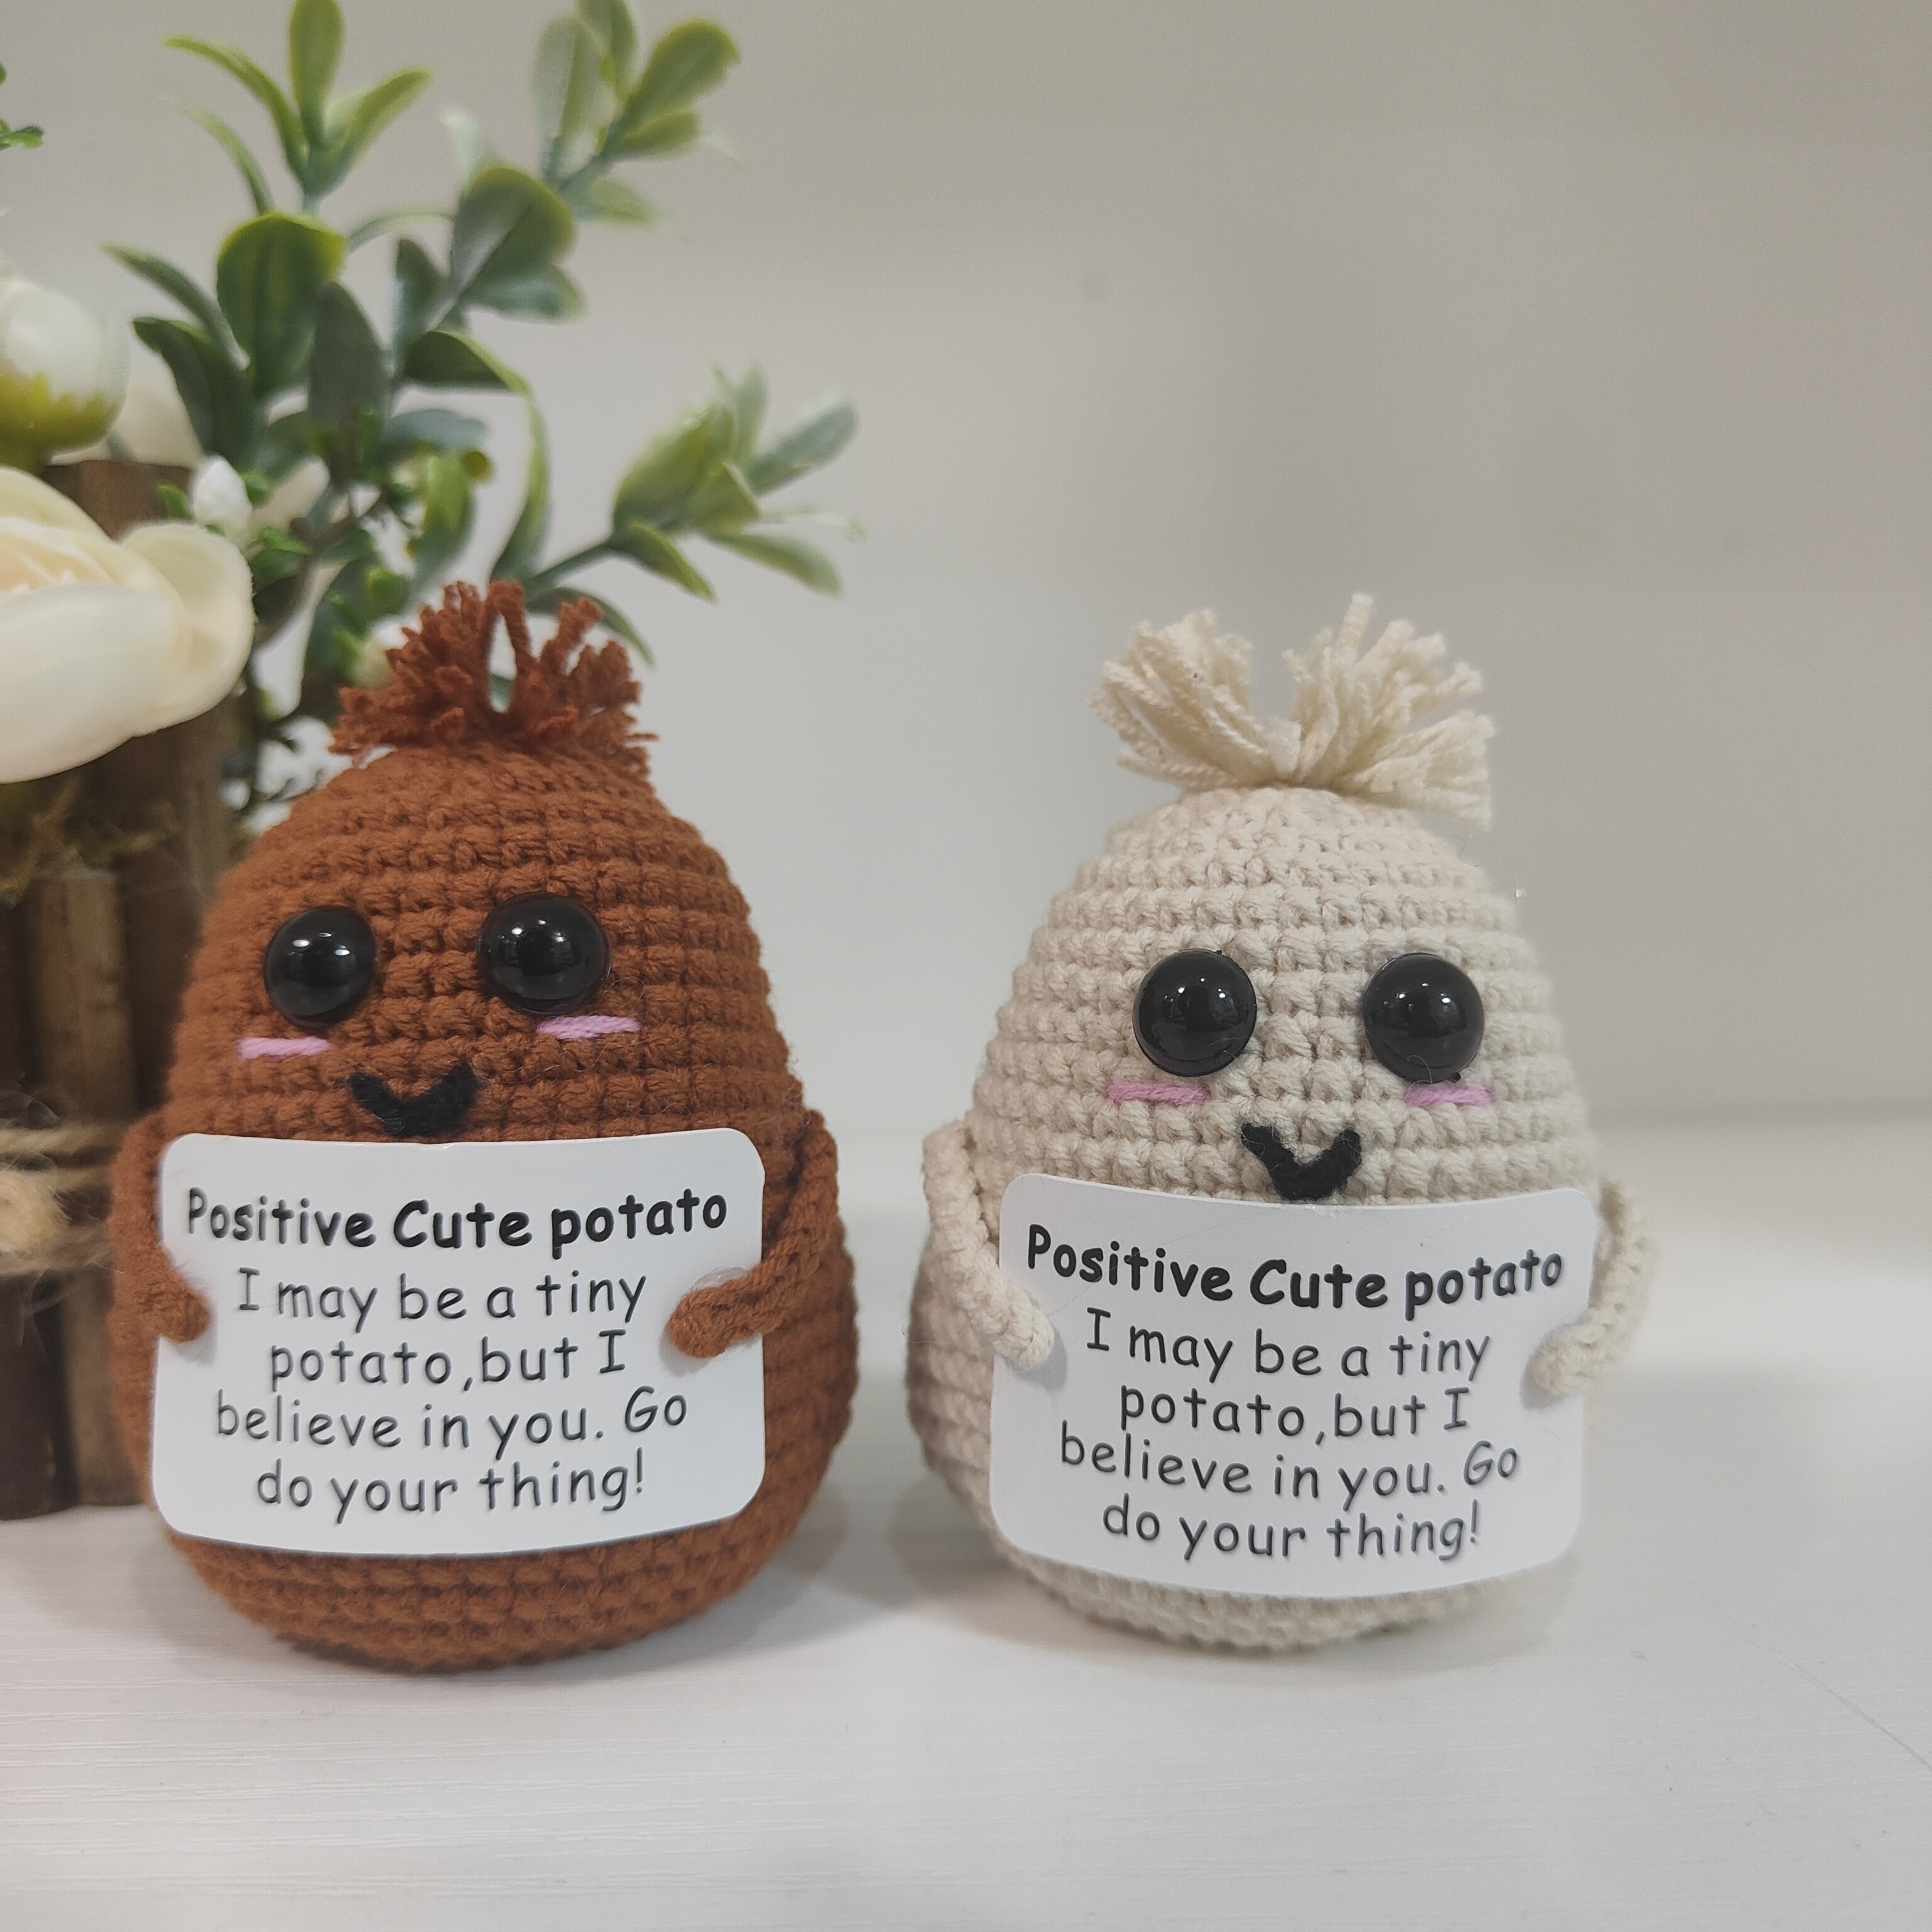 Inspired Toy Funny Positive Poo Knitted Doll Gifts With Positive Card  Interesting Knitted Poo Doll For Desktop Holiday Office Home Decor